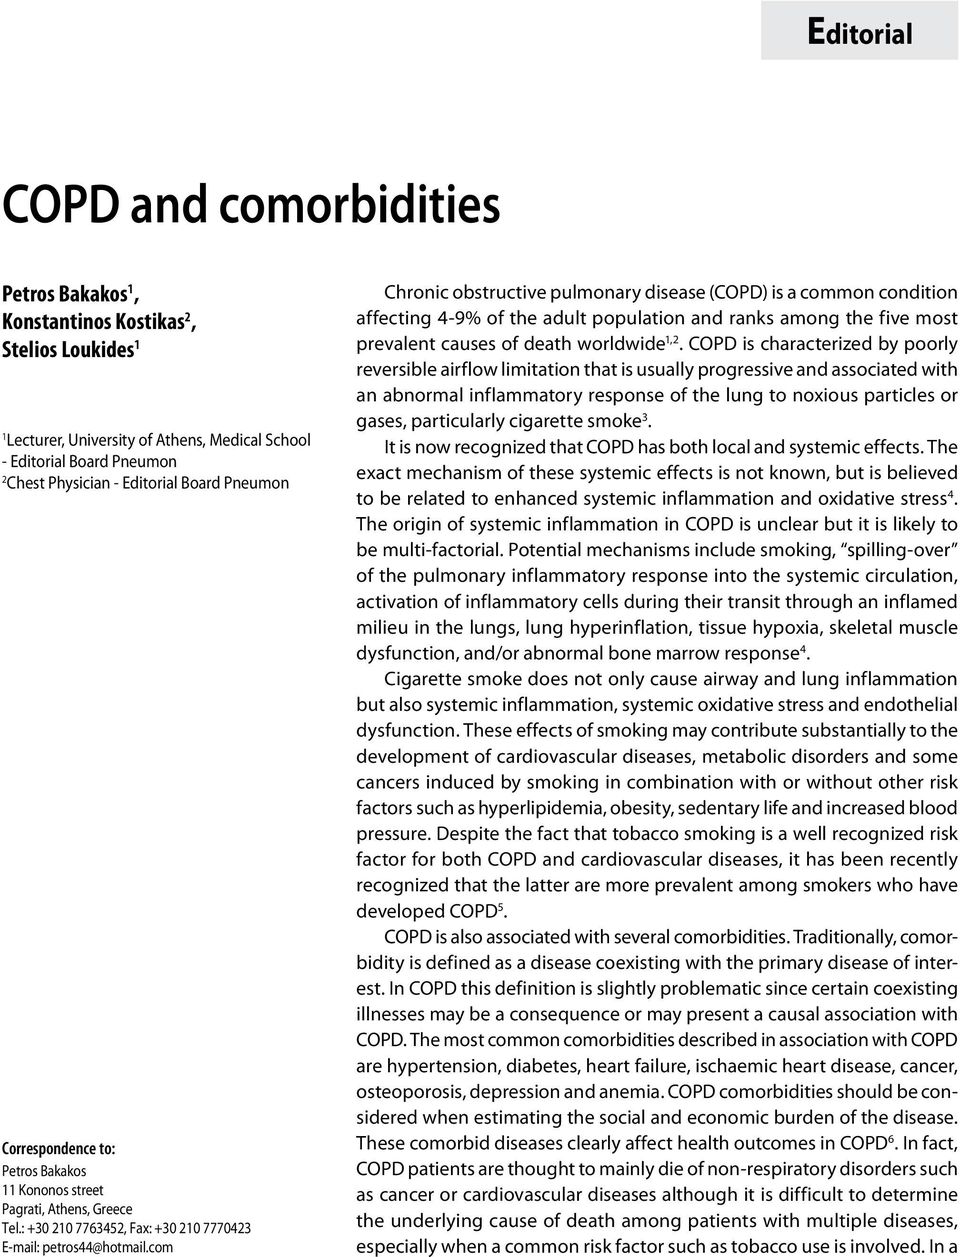 com Chronic obstructive pulmonary disease (COPD) is a common condition affecting 4-9% of the adult population and ranks among the five most prevalent causes of death worldwide 1,2.